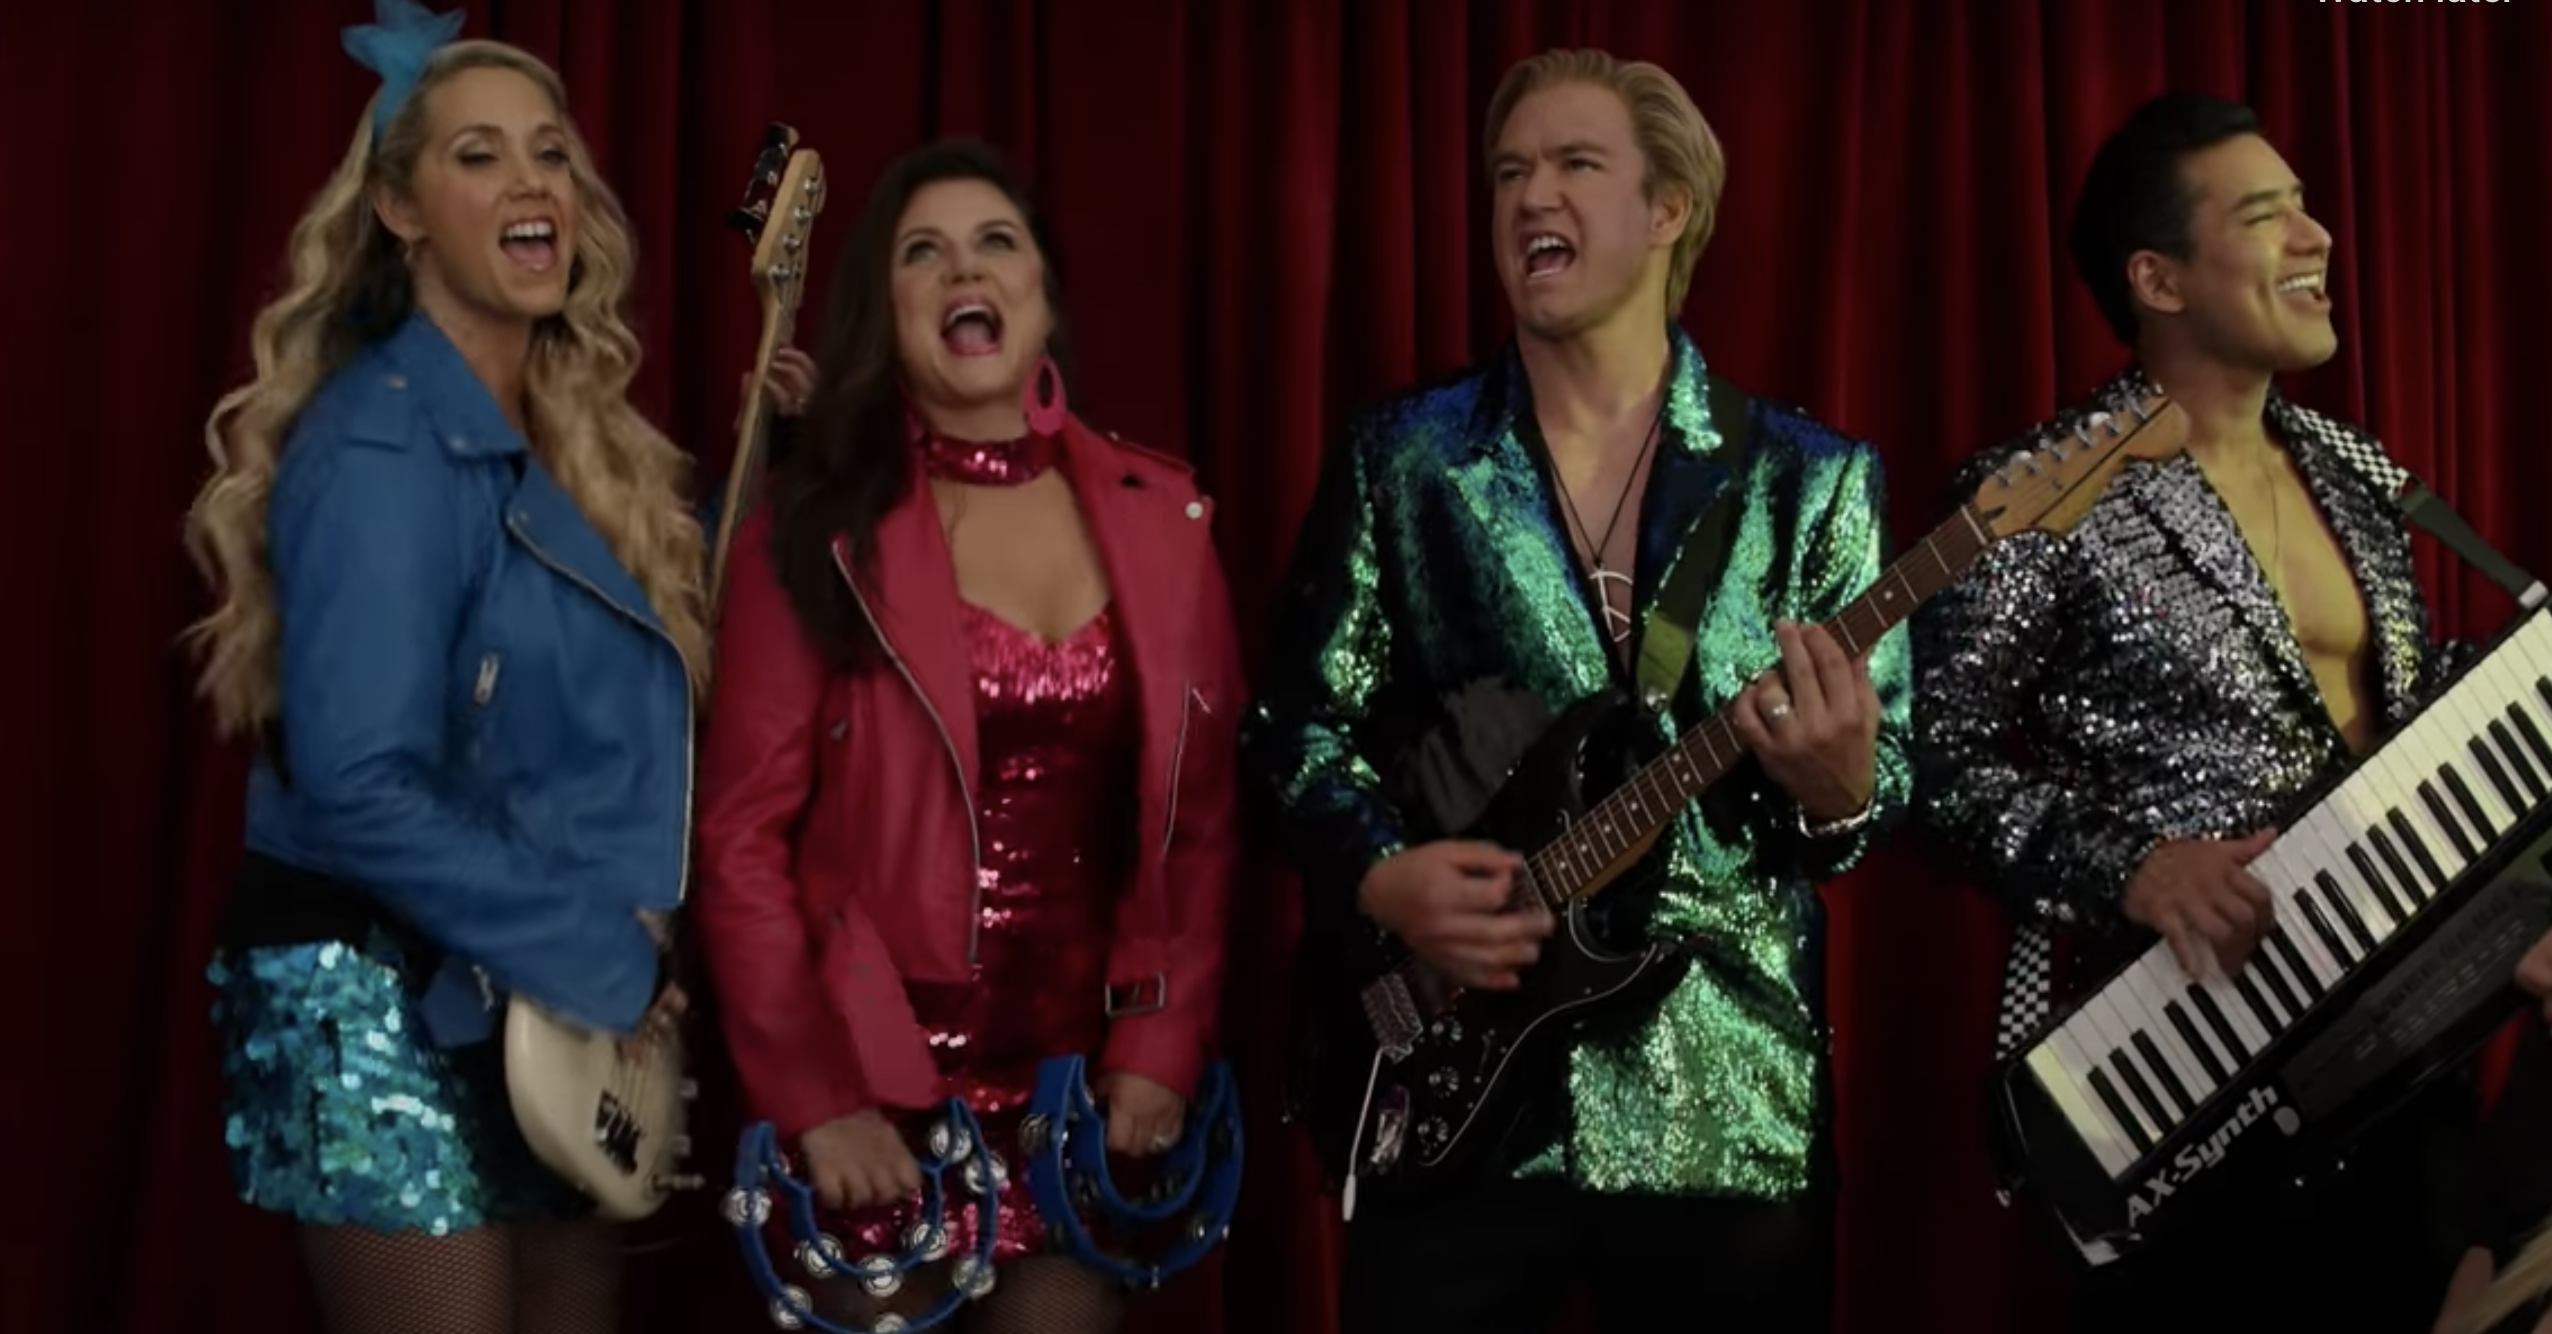 Characters A.C. Slater, Jessie Spano, Kelly Kapowski, and Zack Morris performing in a band